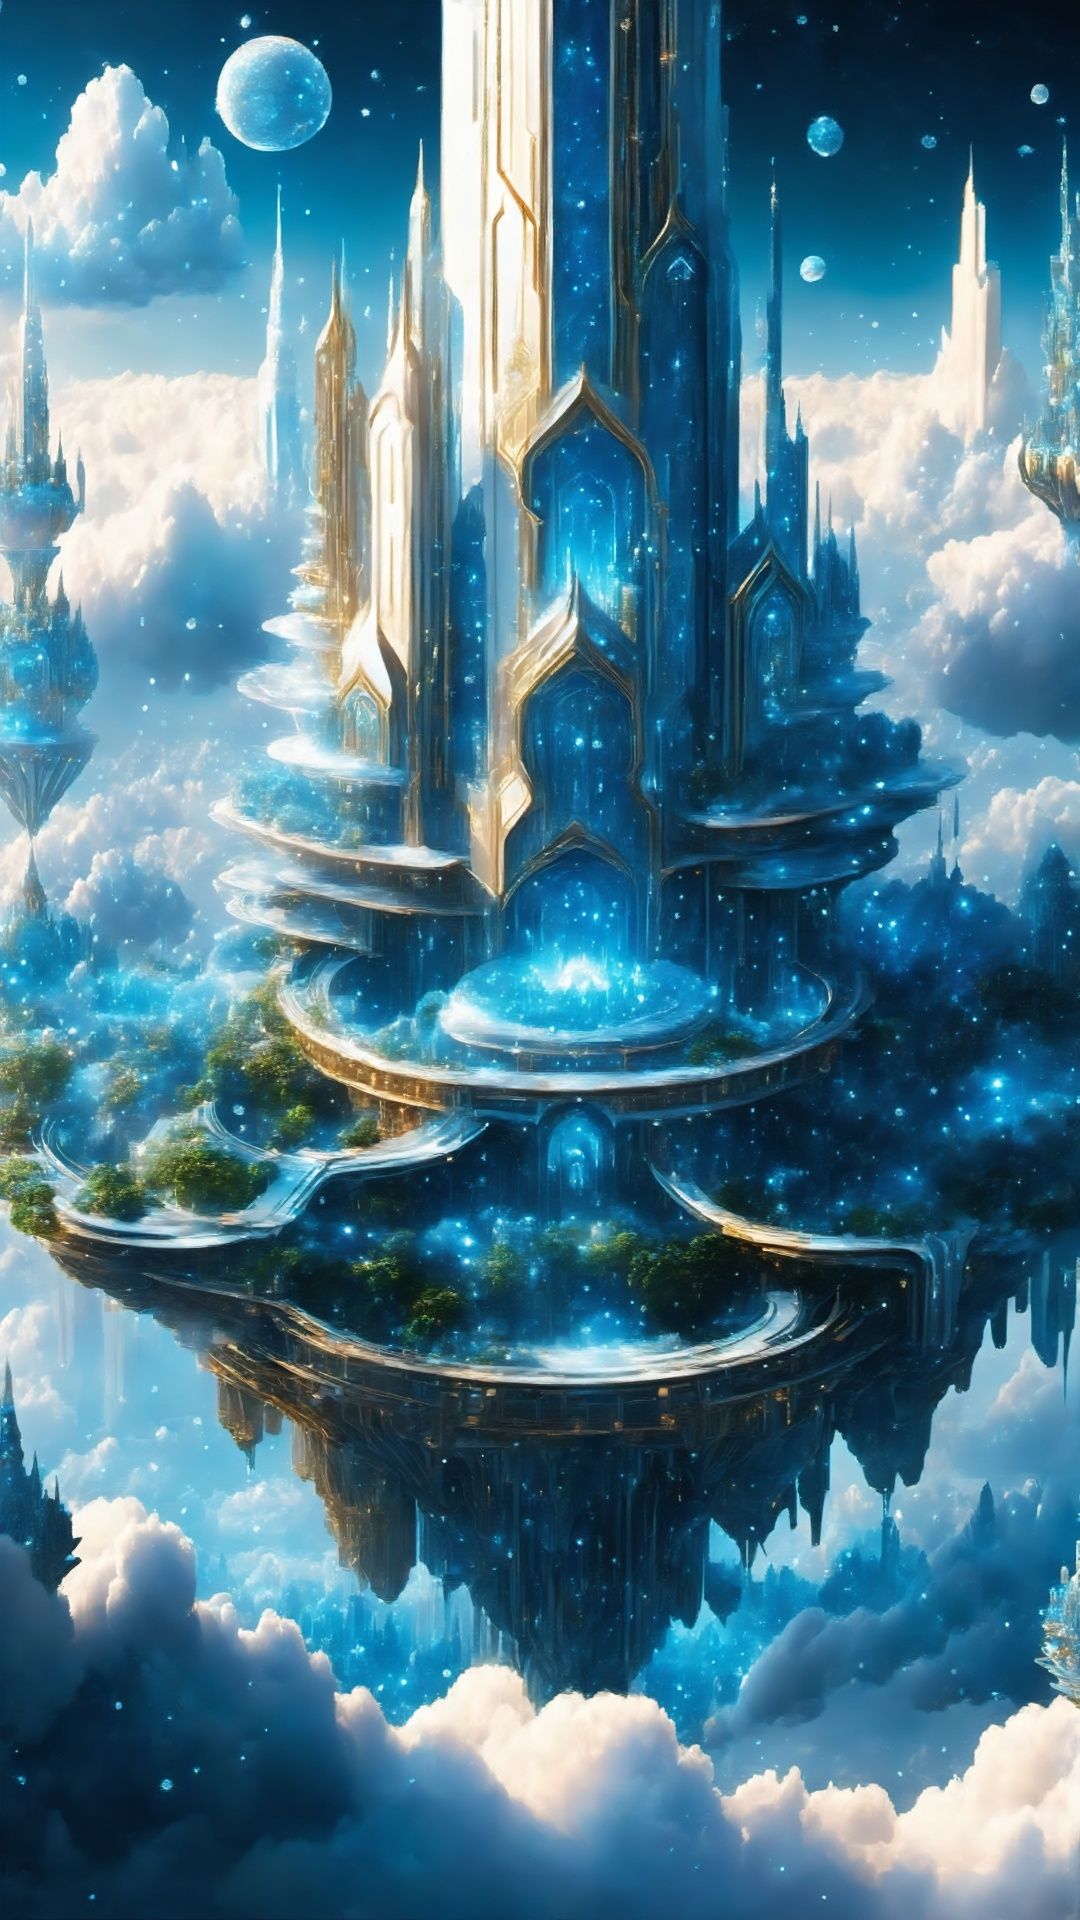 (Fantasy Architectural Style) (Fantasy Elements) (Advanced Color Art) (Architectural Art) (Intricate Details) High above the city, there is a city in the clouds. Palaces and gardens are built on these clouds, and residents can walk among the fluffy clouds. , enjoy the panoramic view of the city. The buildings here are made of clouds and crystals, just like a fairyland